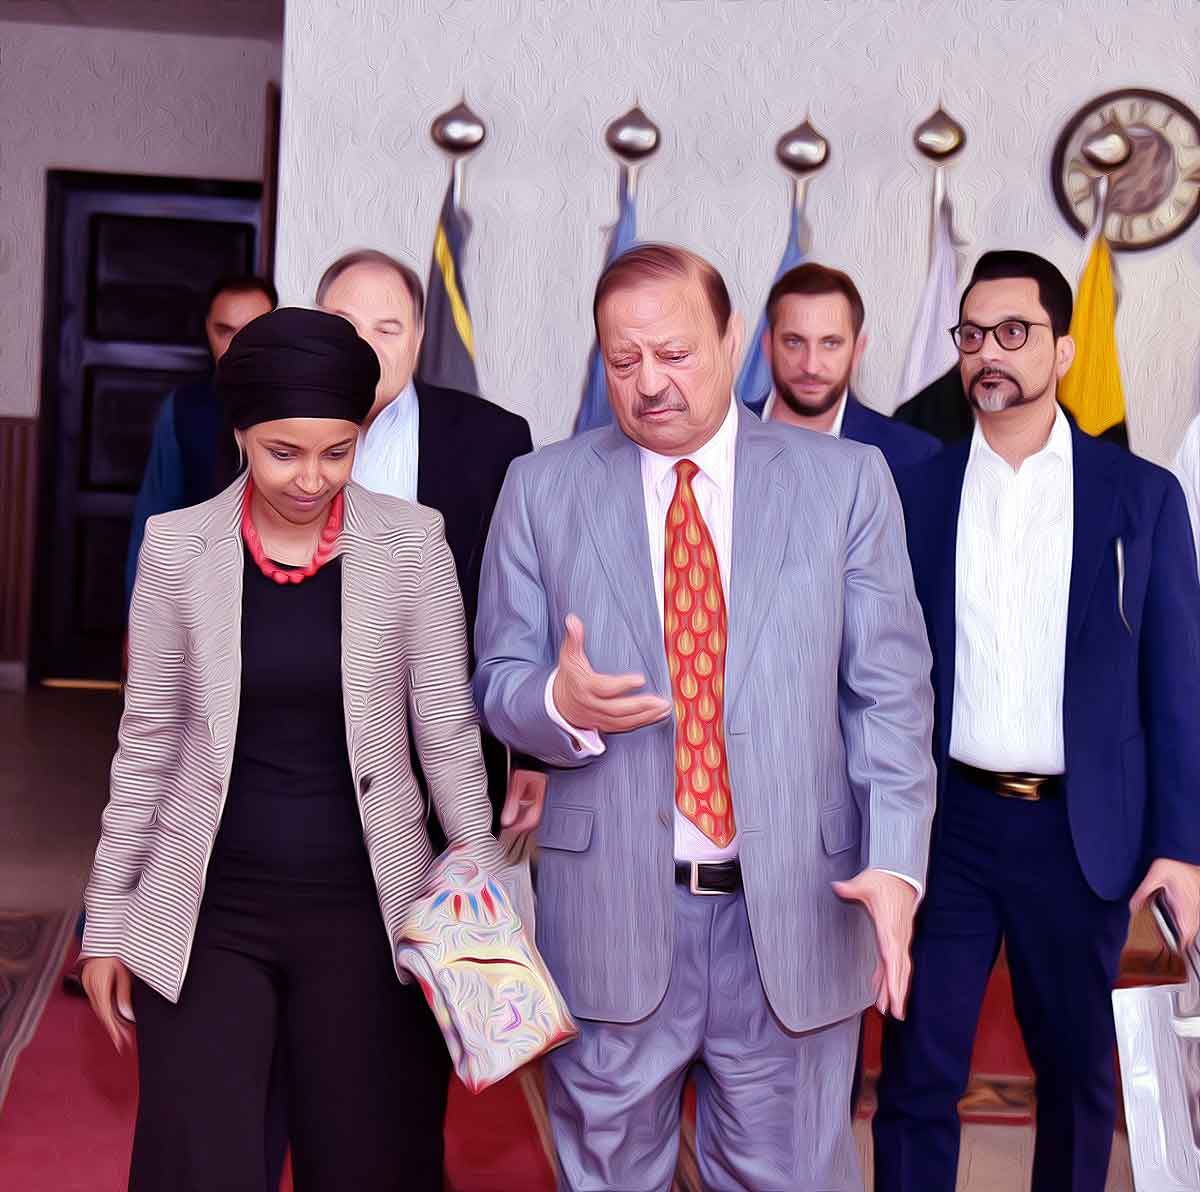 Omar, the Somalia-born radical Islamist politician visited PoK, and met its ‘President’ Sultan Mahmood Chaudhry. She discussed the alleged violation of human rights in Jammu and Kashmir with Chaudhry